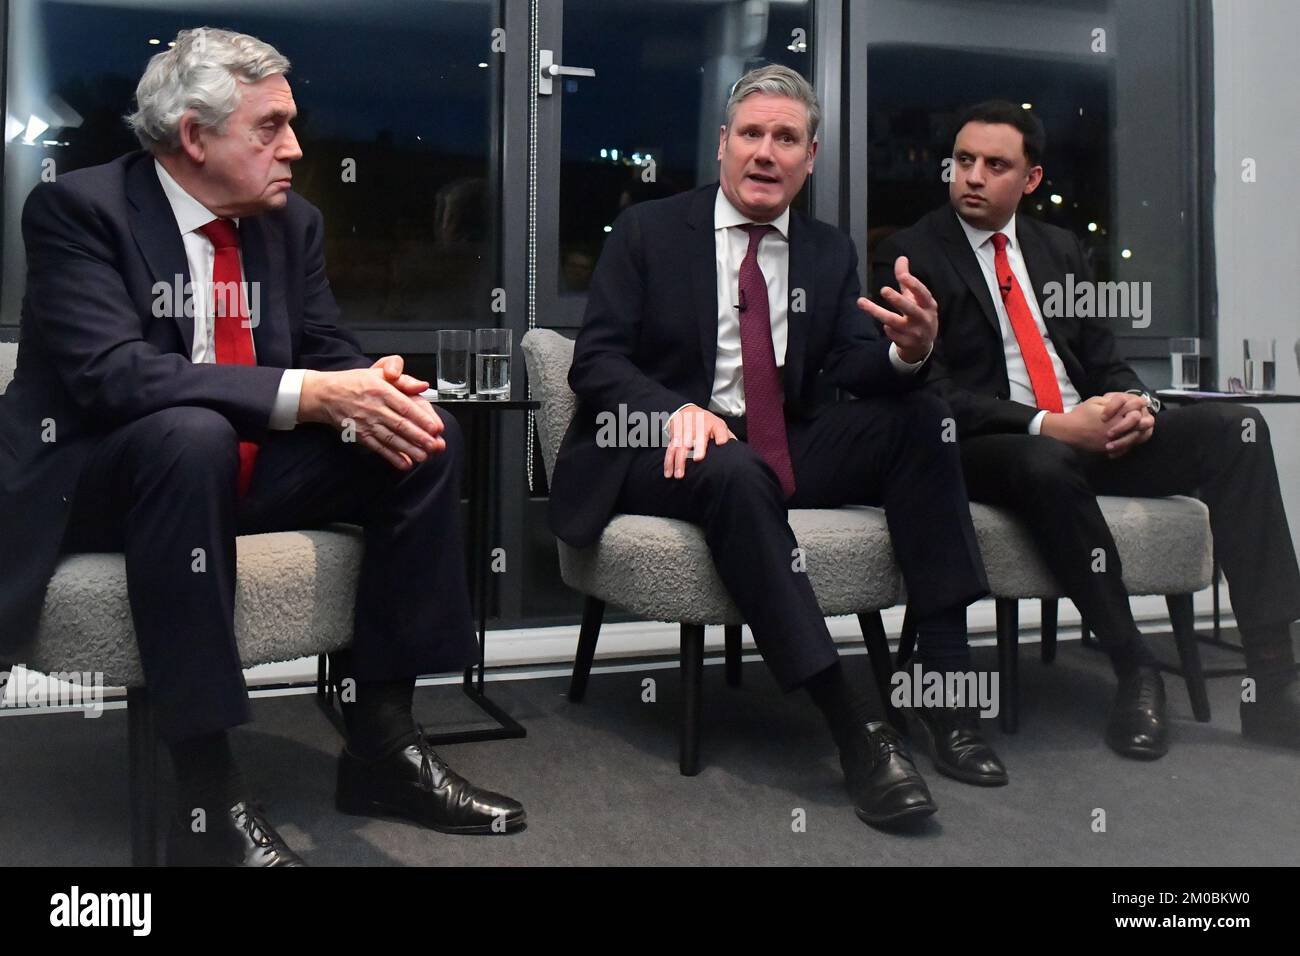 Edinburgh Scotland, UK 05 December 2022. Former Labour Prime Minister Gordon Brown, Labour leader Sir Keir Starmer and Scottish Labour leader Anas Sarwar at the Apex Hotel in the Grassmarket to present plans on how a Labour UK government would redistribute power throughout the UK.  credit sst/alamy live news Stock Photo